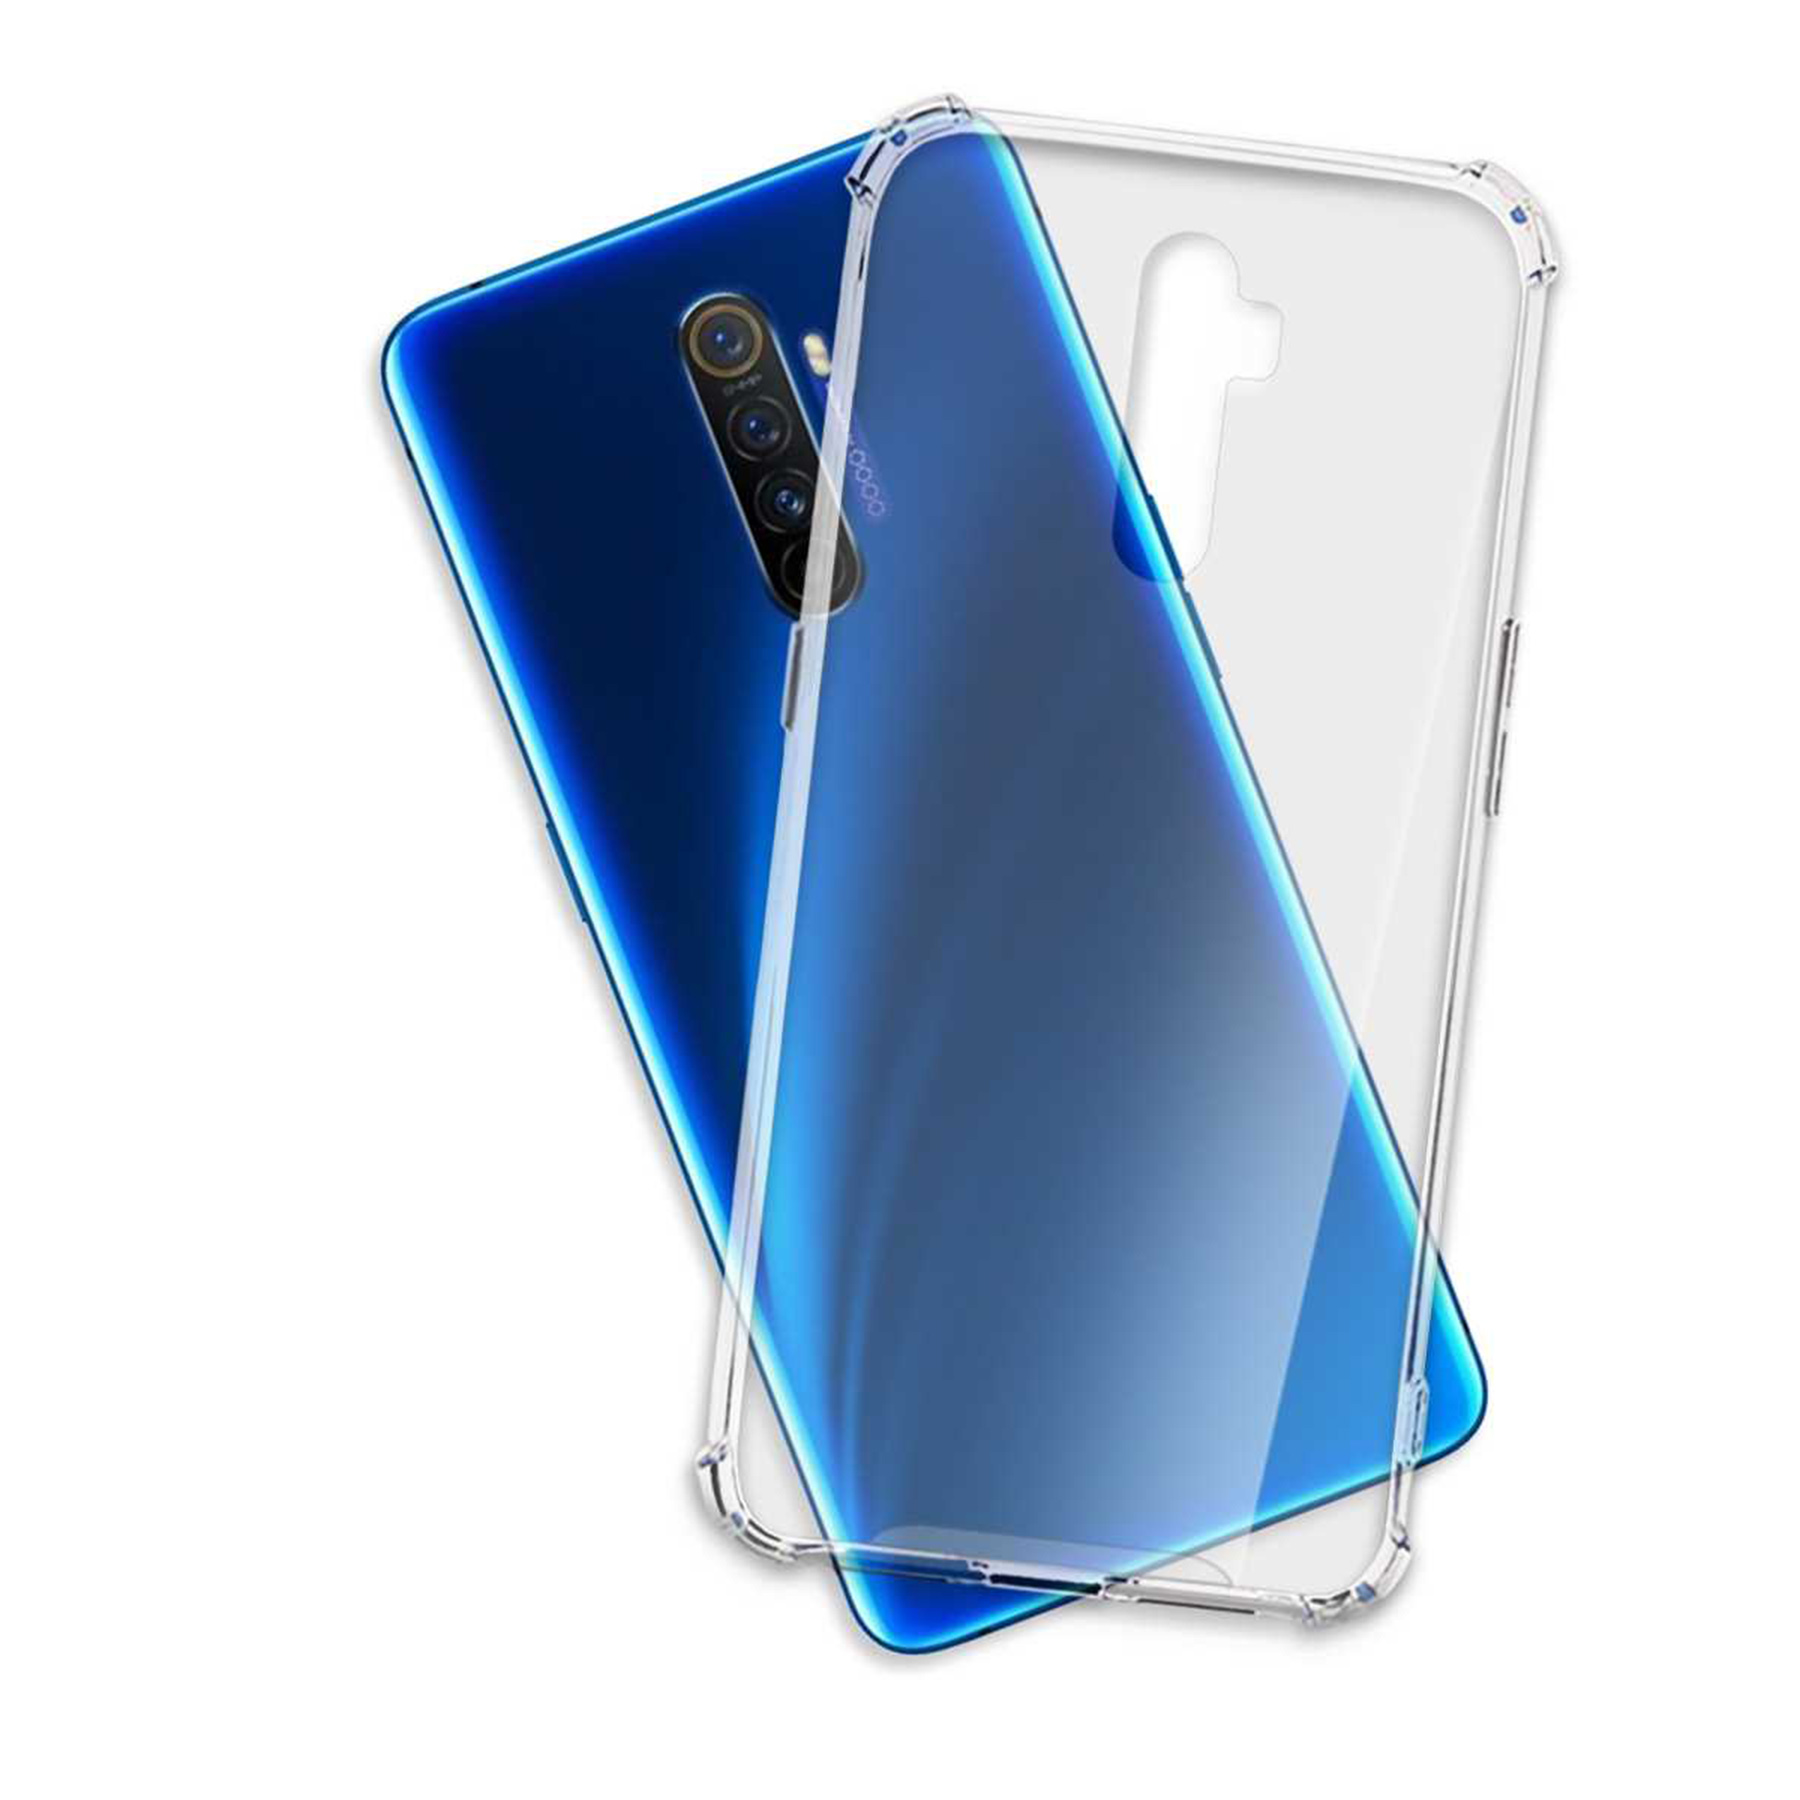 MTB MORE ENERGY Case, Pro, Realme Backcover, Armor X2 Oppo, Transparent Clear